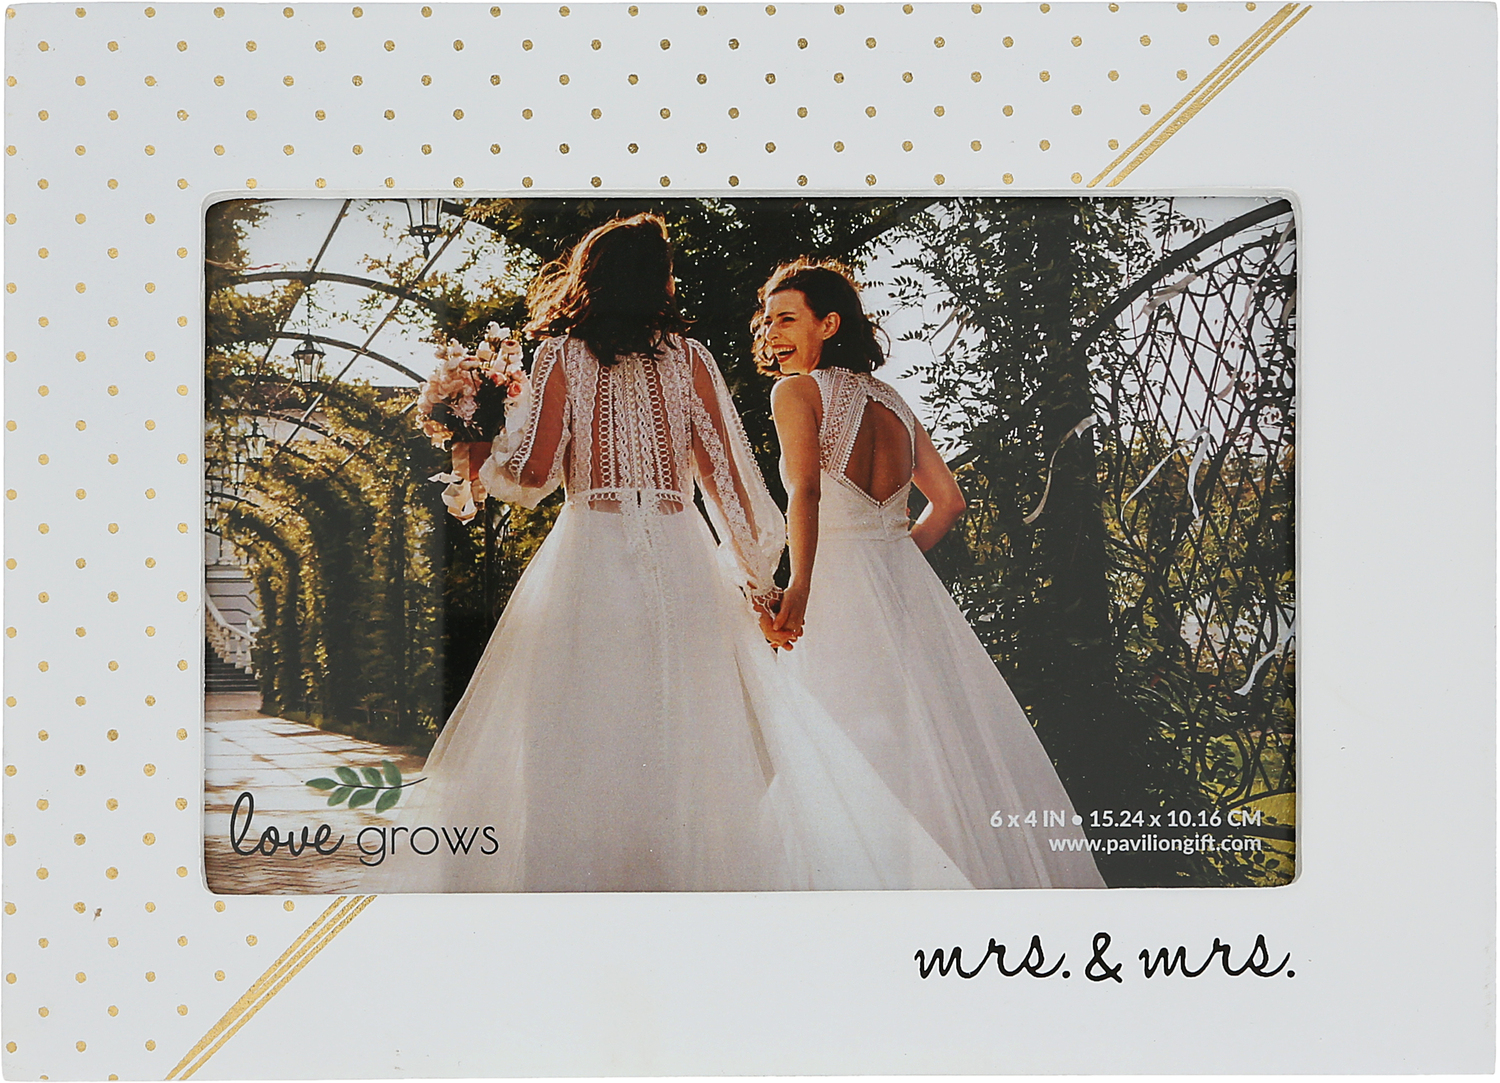 Mrs. & Mrs. by Love Grows - Mrs. & Mrs. - 7.5" x 5.5" MDF Frame
(Holds 6" x 4" Photo)